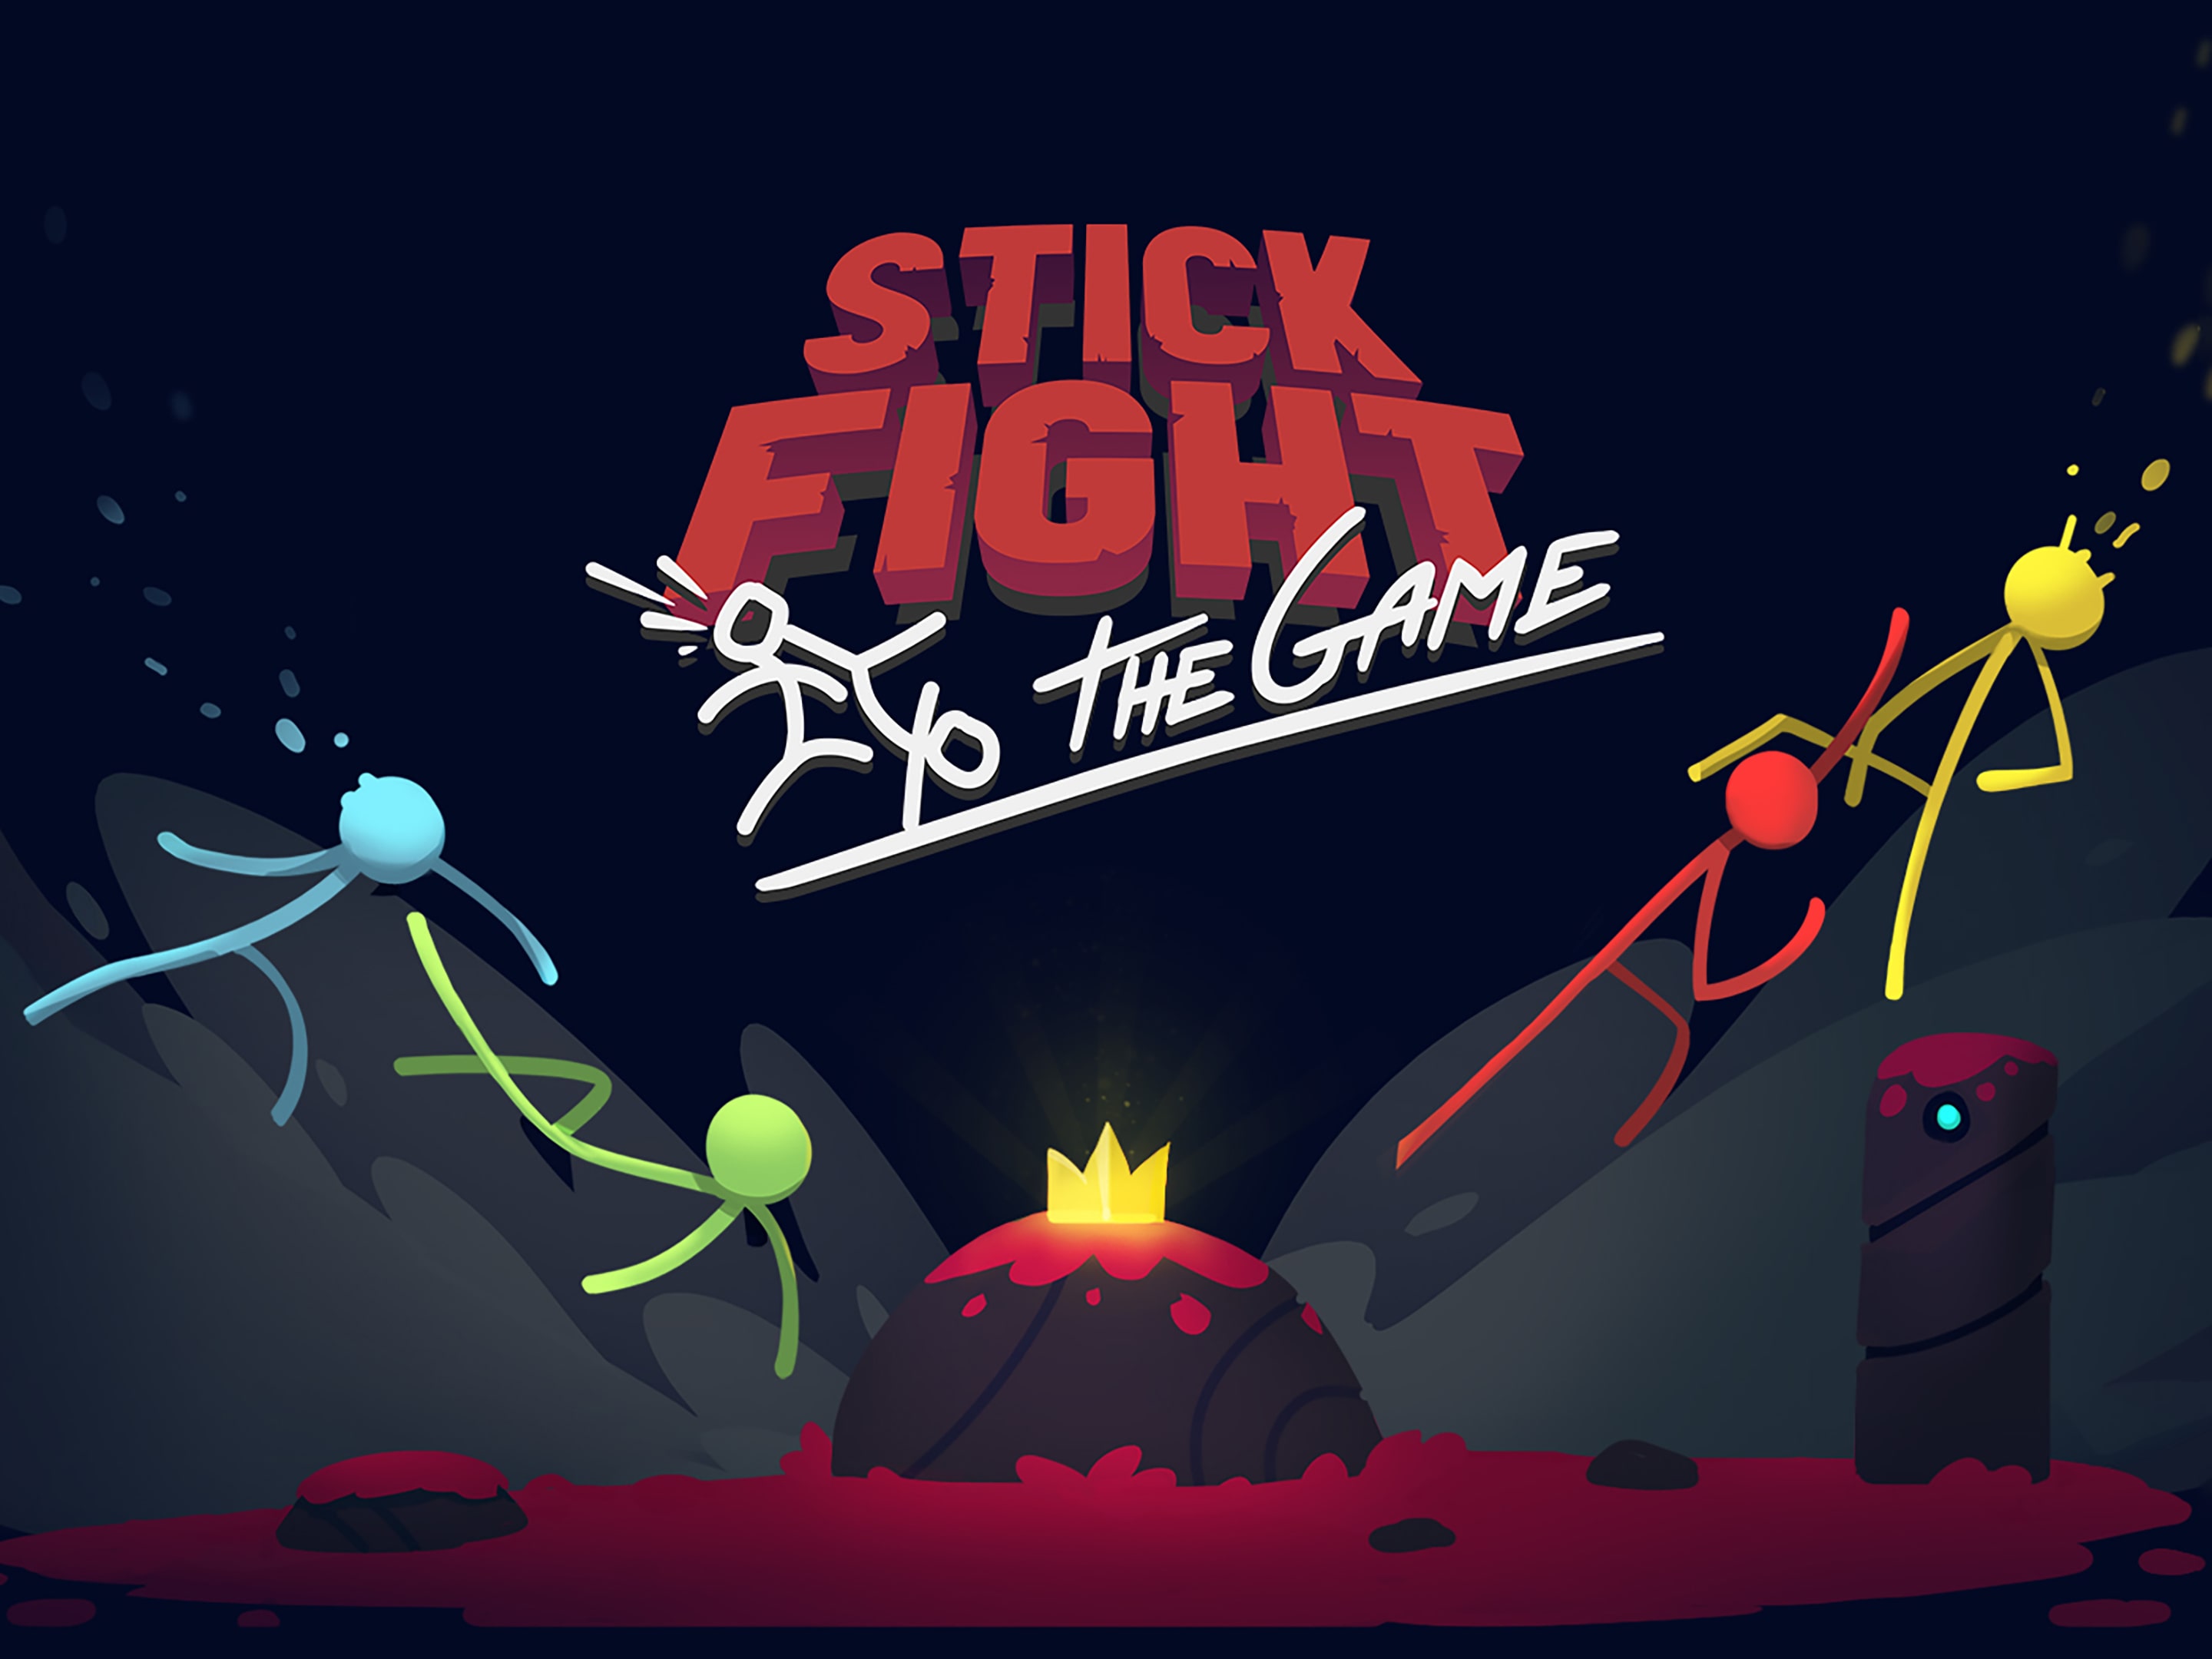 Play Stickman Games Online on PC & Mobile (FREE)